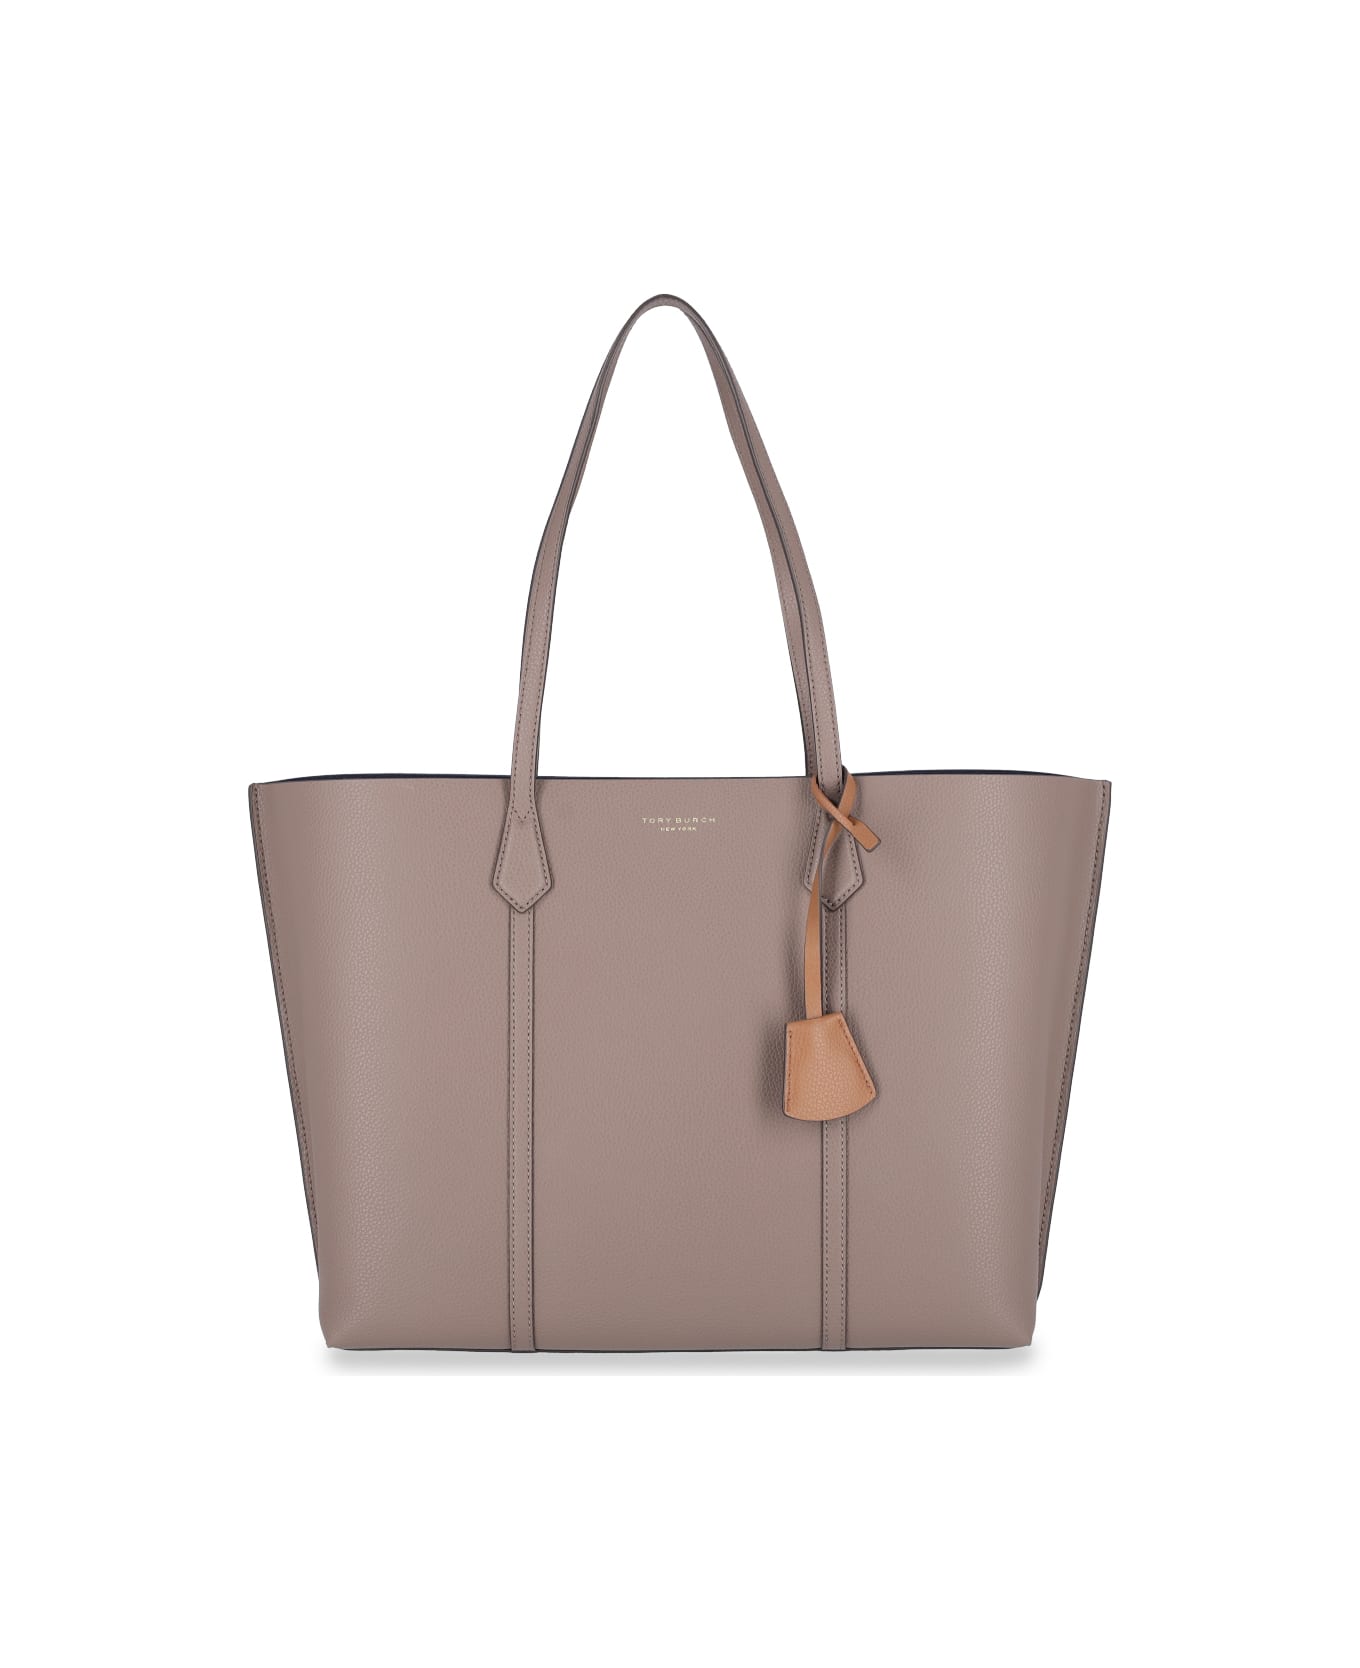 Tory Burch "perry" Tote Bag - Taupe